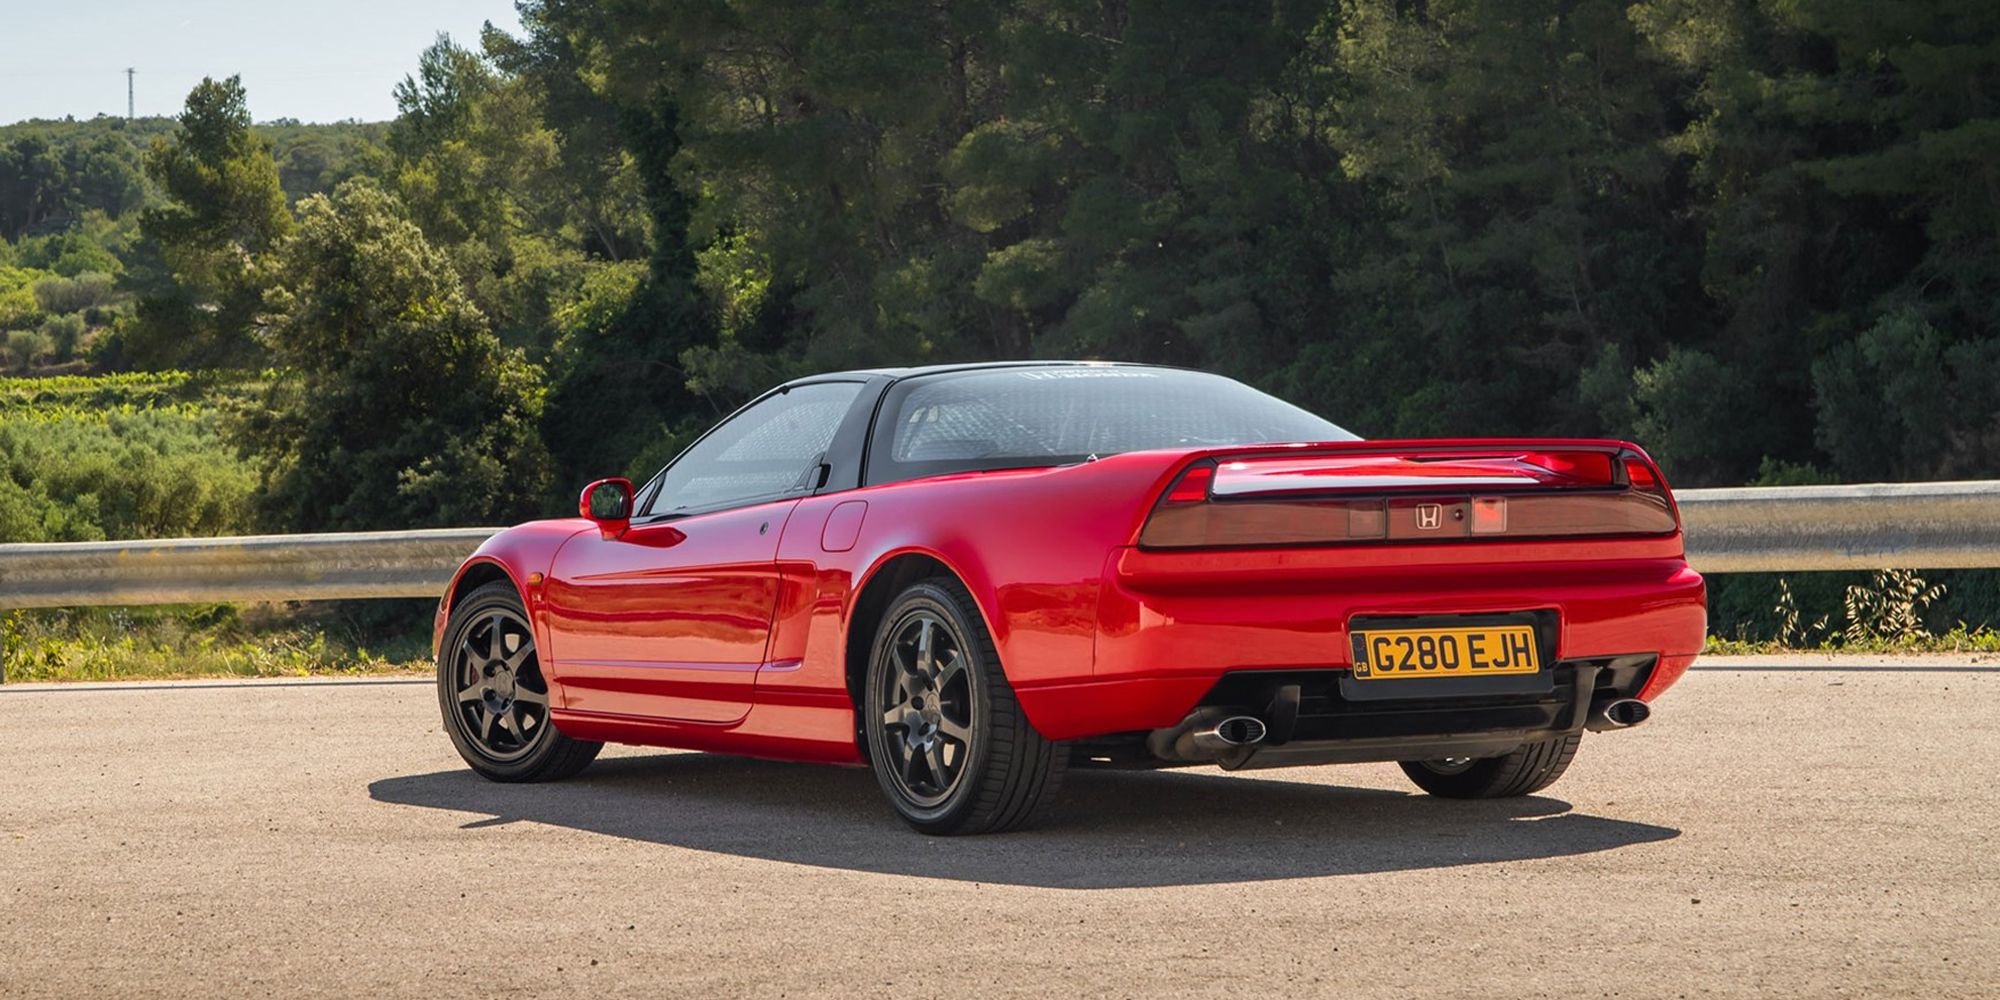 The rear of the NA1 NSX